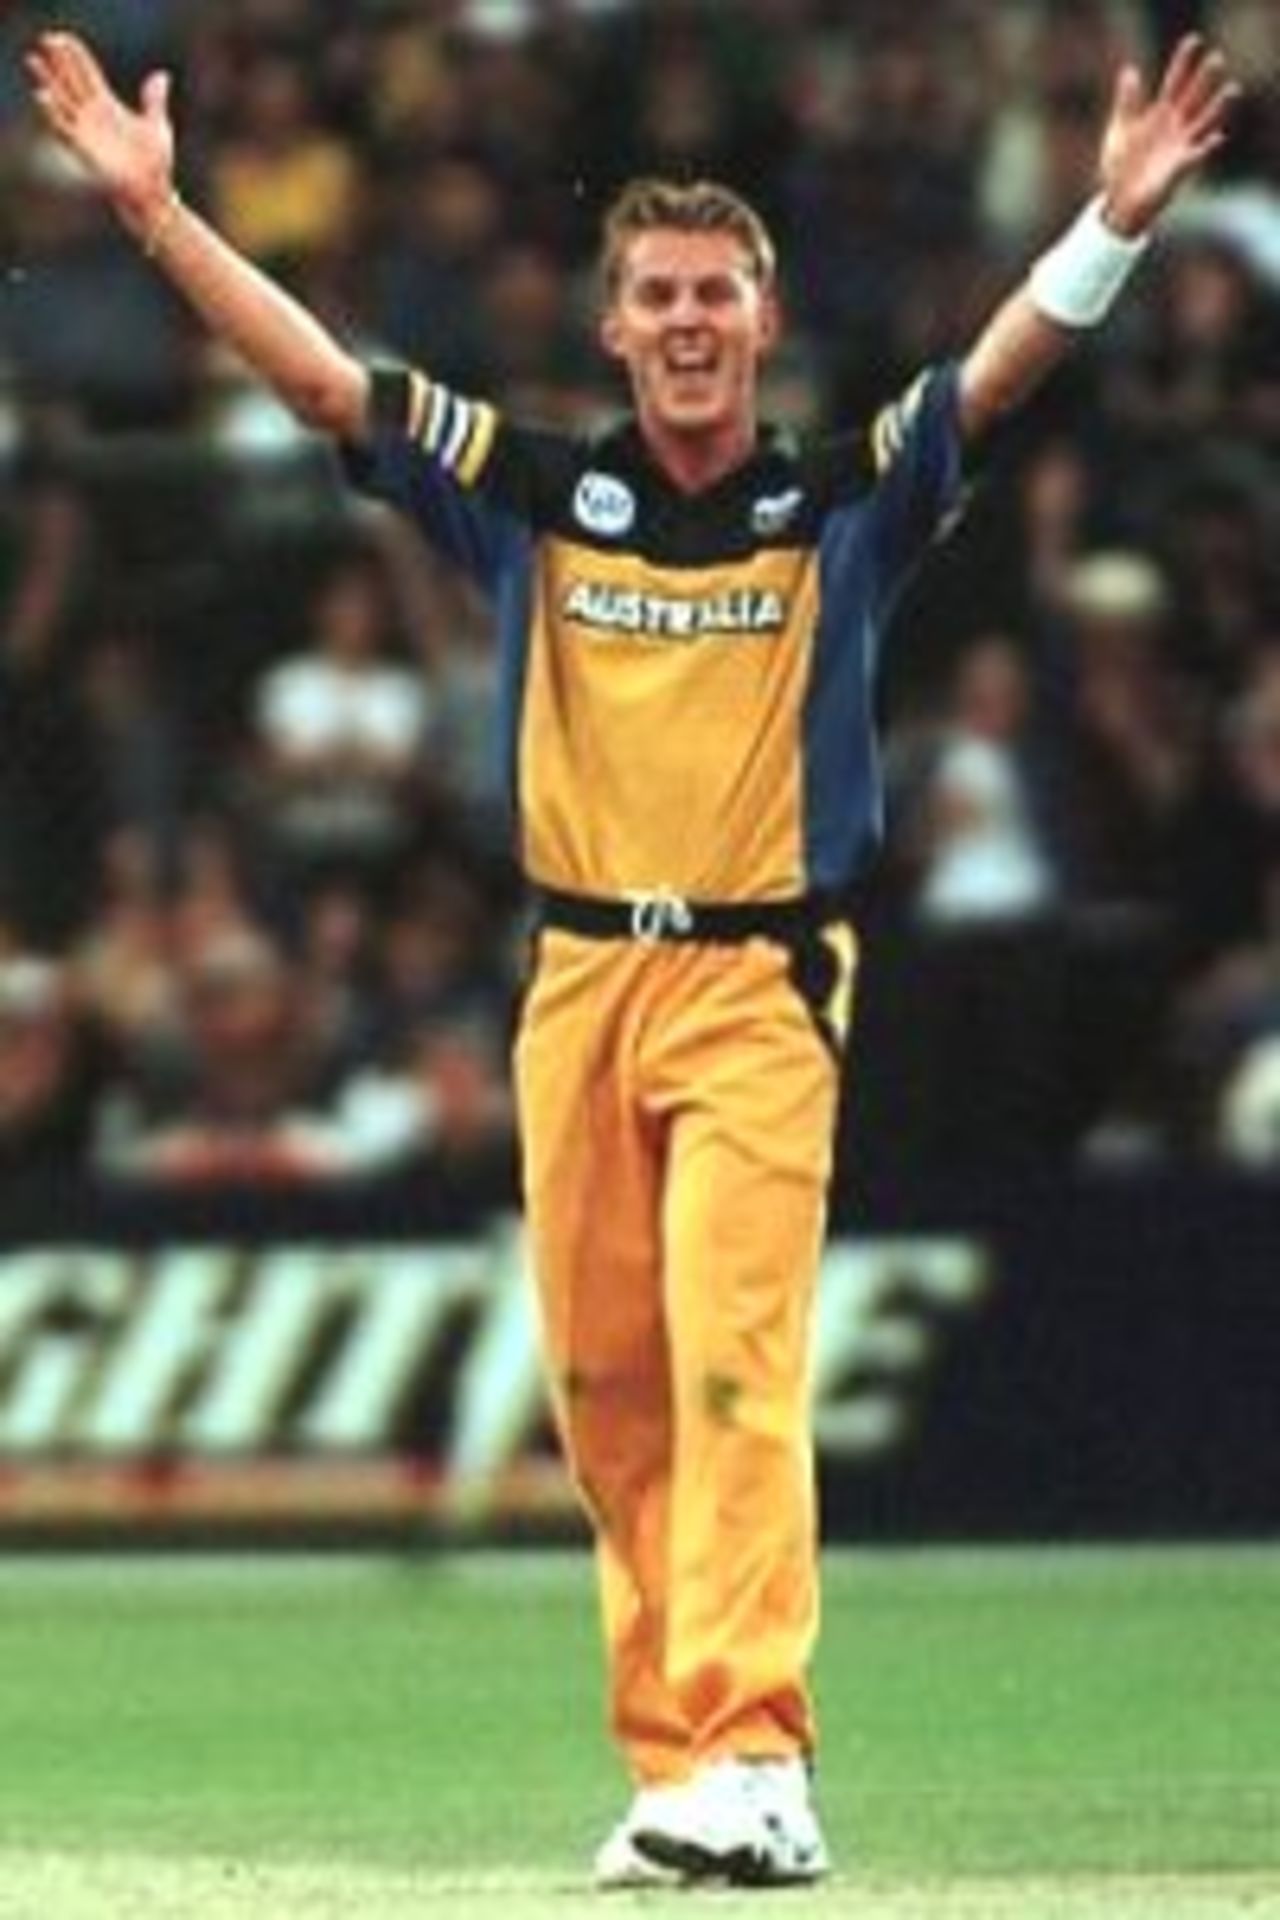 26 Jan 2000: Brett Lee of Australia celebrates trapping Kanitkar of India LBW first ball for nought during the Carlton and United Breweries one day international between Australia and India at the Adelaide Oval, Adelaide, Australia.